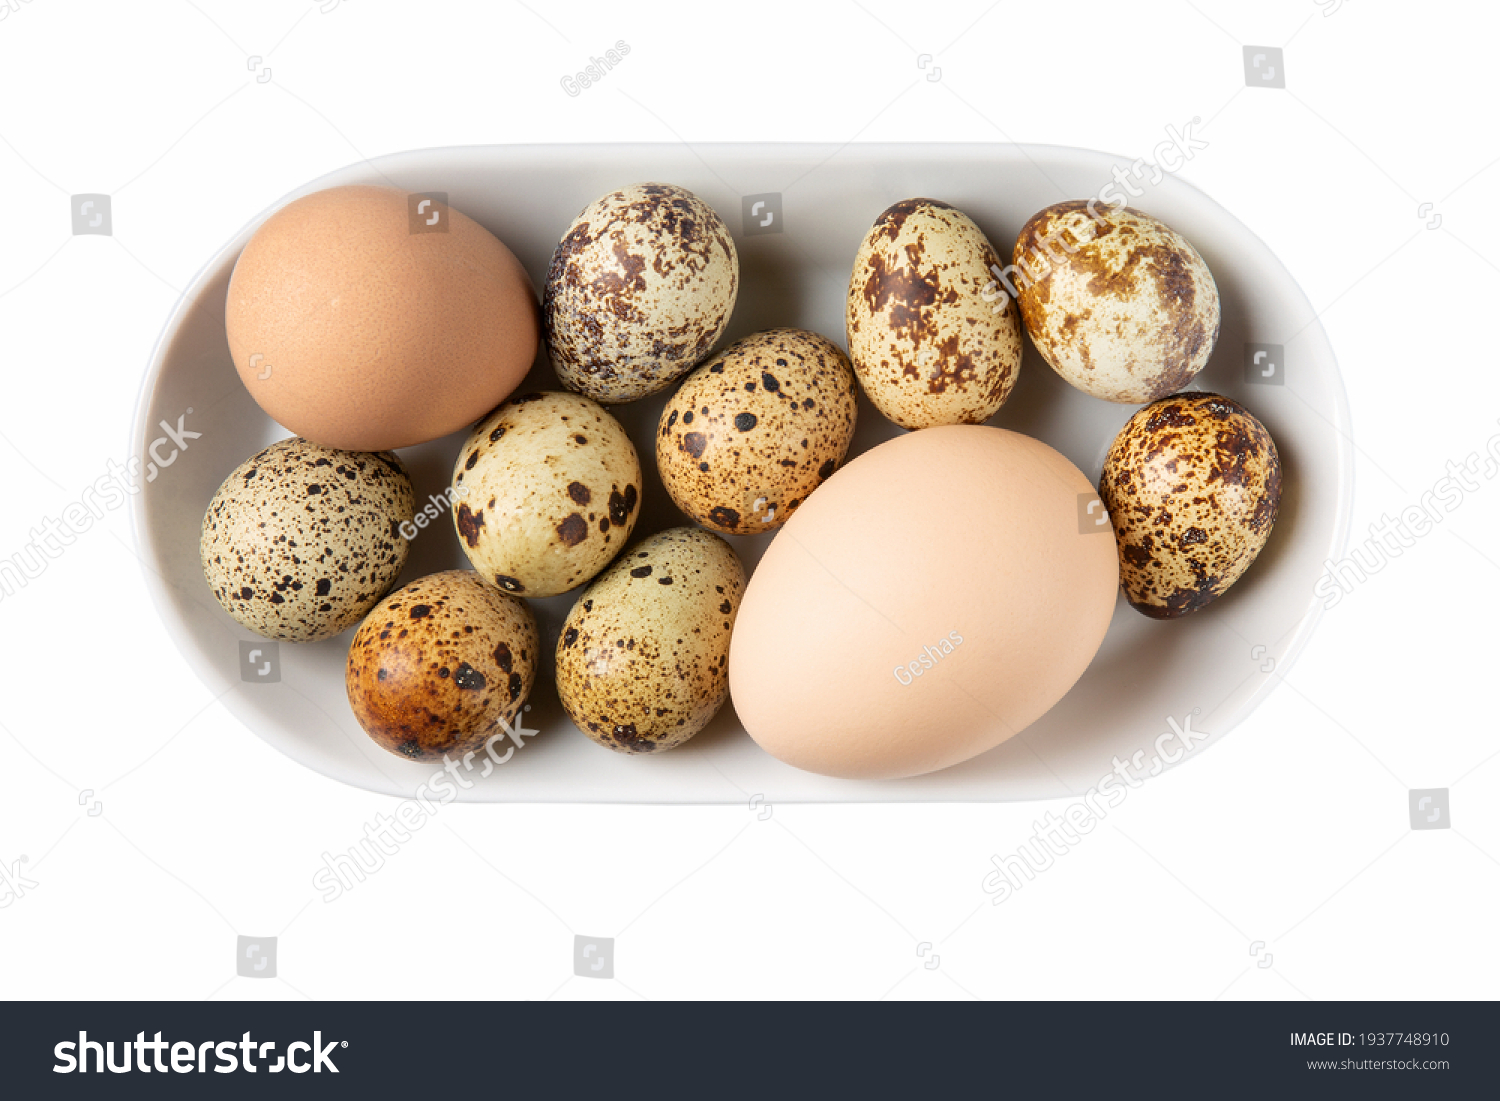 Different types of eggs in bowl isolated on white. Chicken, guinea fowl and quail eggs on white plate. Top view. #1937748910